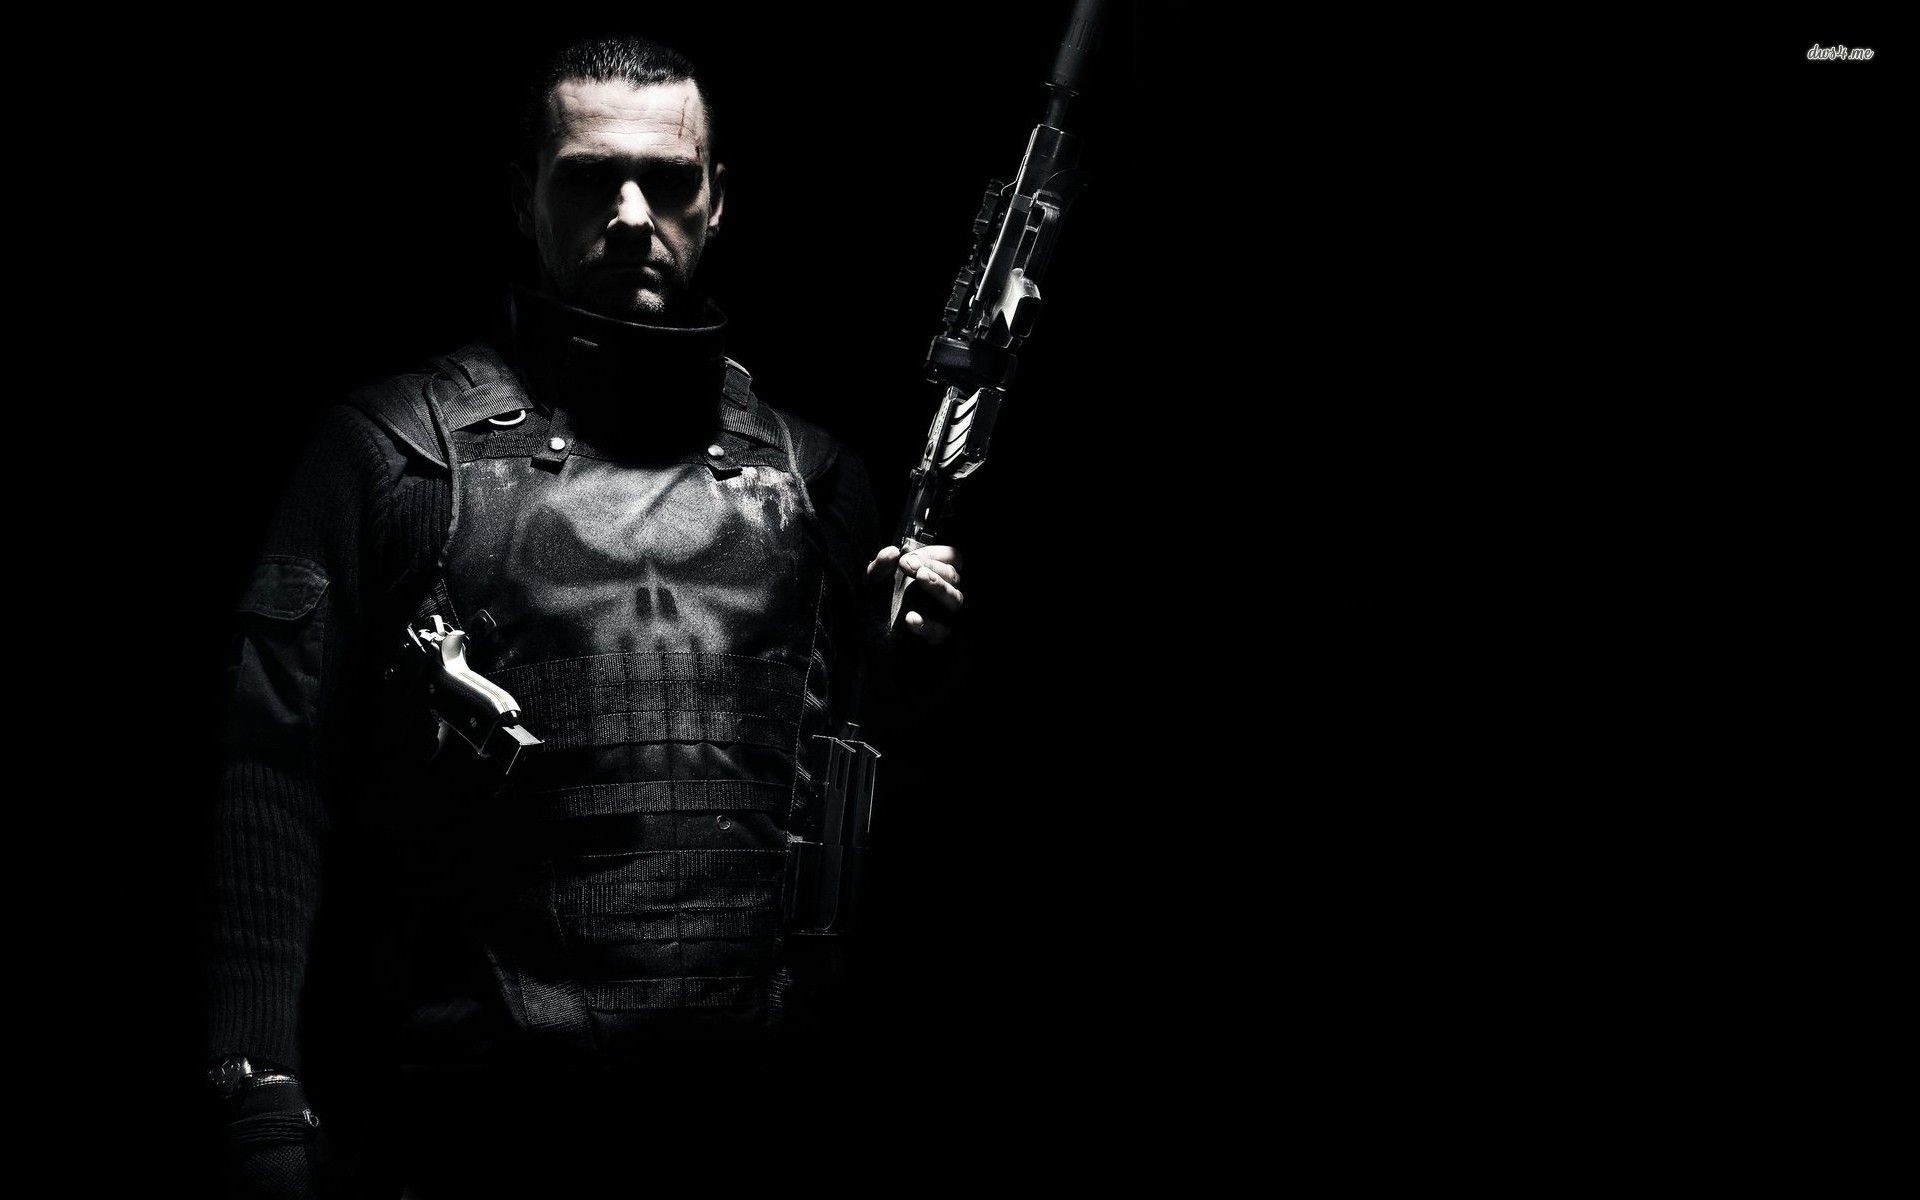 1920x1200 187 The Punisher HD Wallpapers | Backgrounds - Wallpaper Abyss 130 Punisher  HD Wallpapers | Backgrounds - Wallpaper Abyss ...